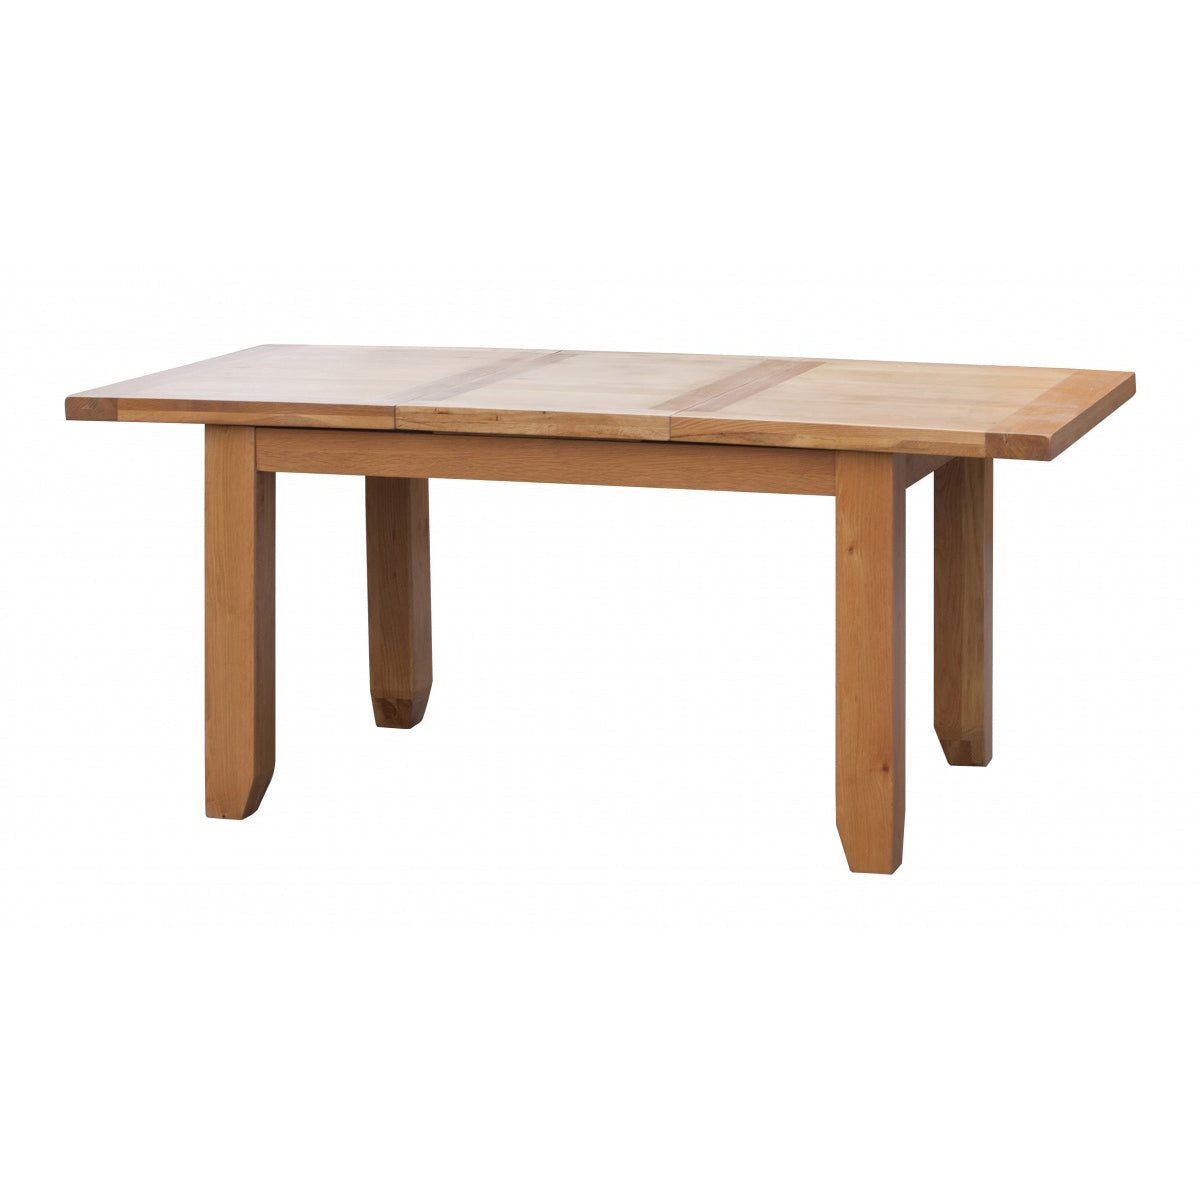 Acorn Solid Oak Extending Dining Table Large